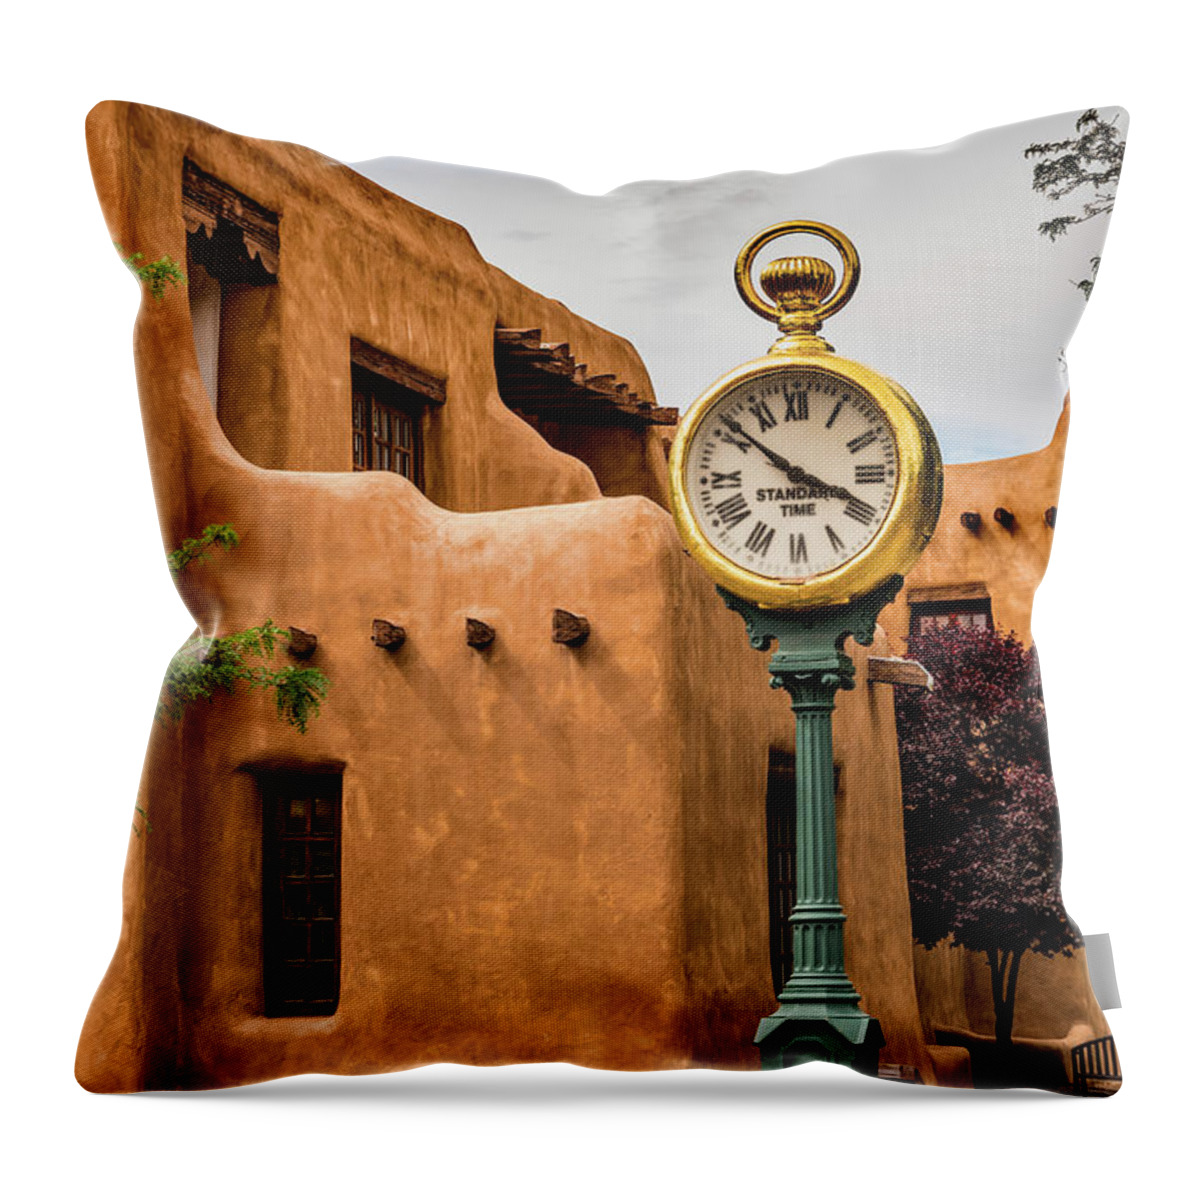 Adobe Throw Pillow featuring the photograph The Spitz Clock by Paul LeSage